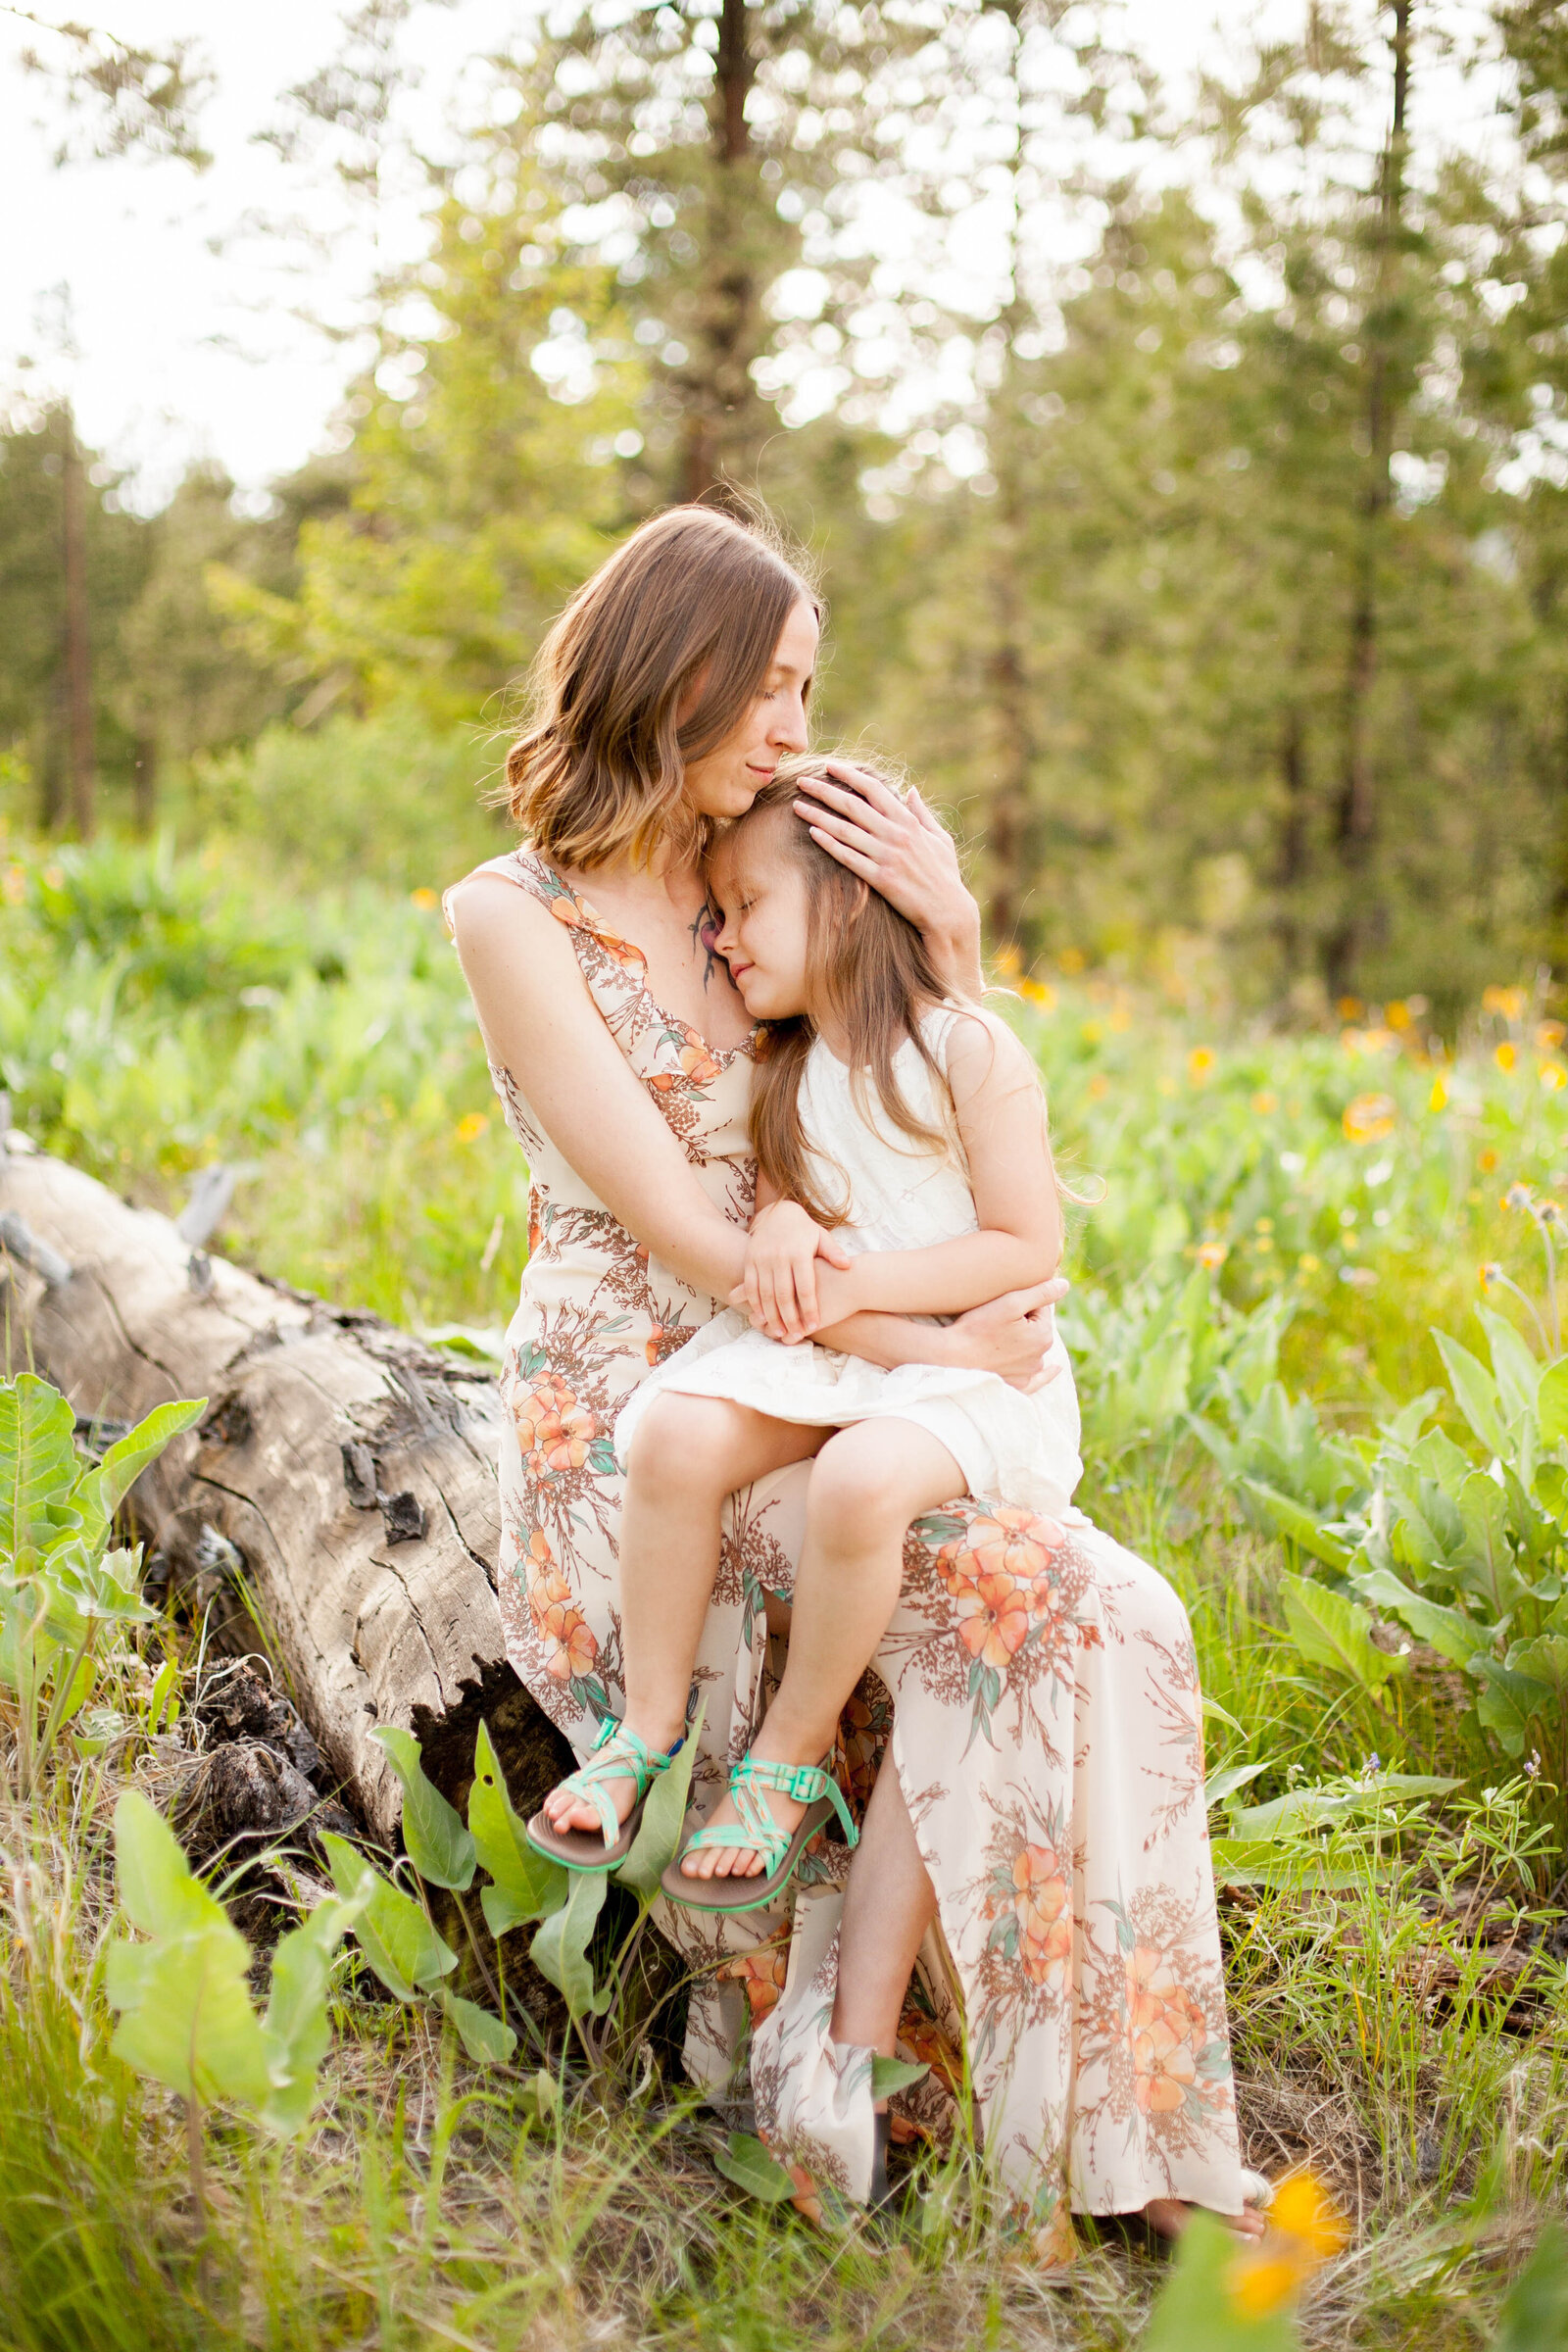 A brown haired woman holding her child in a field.